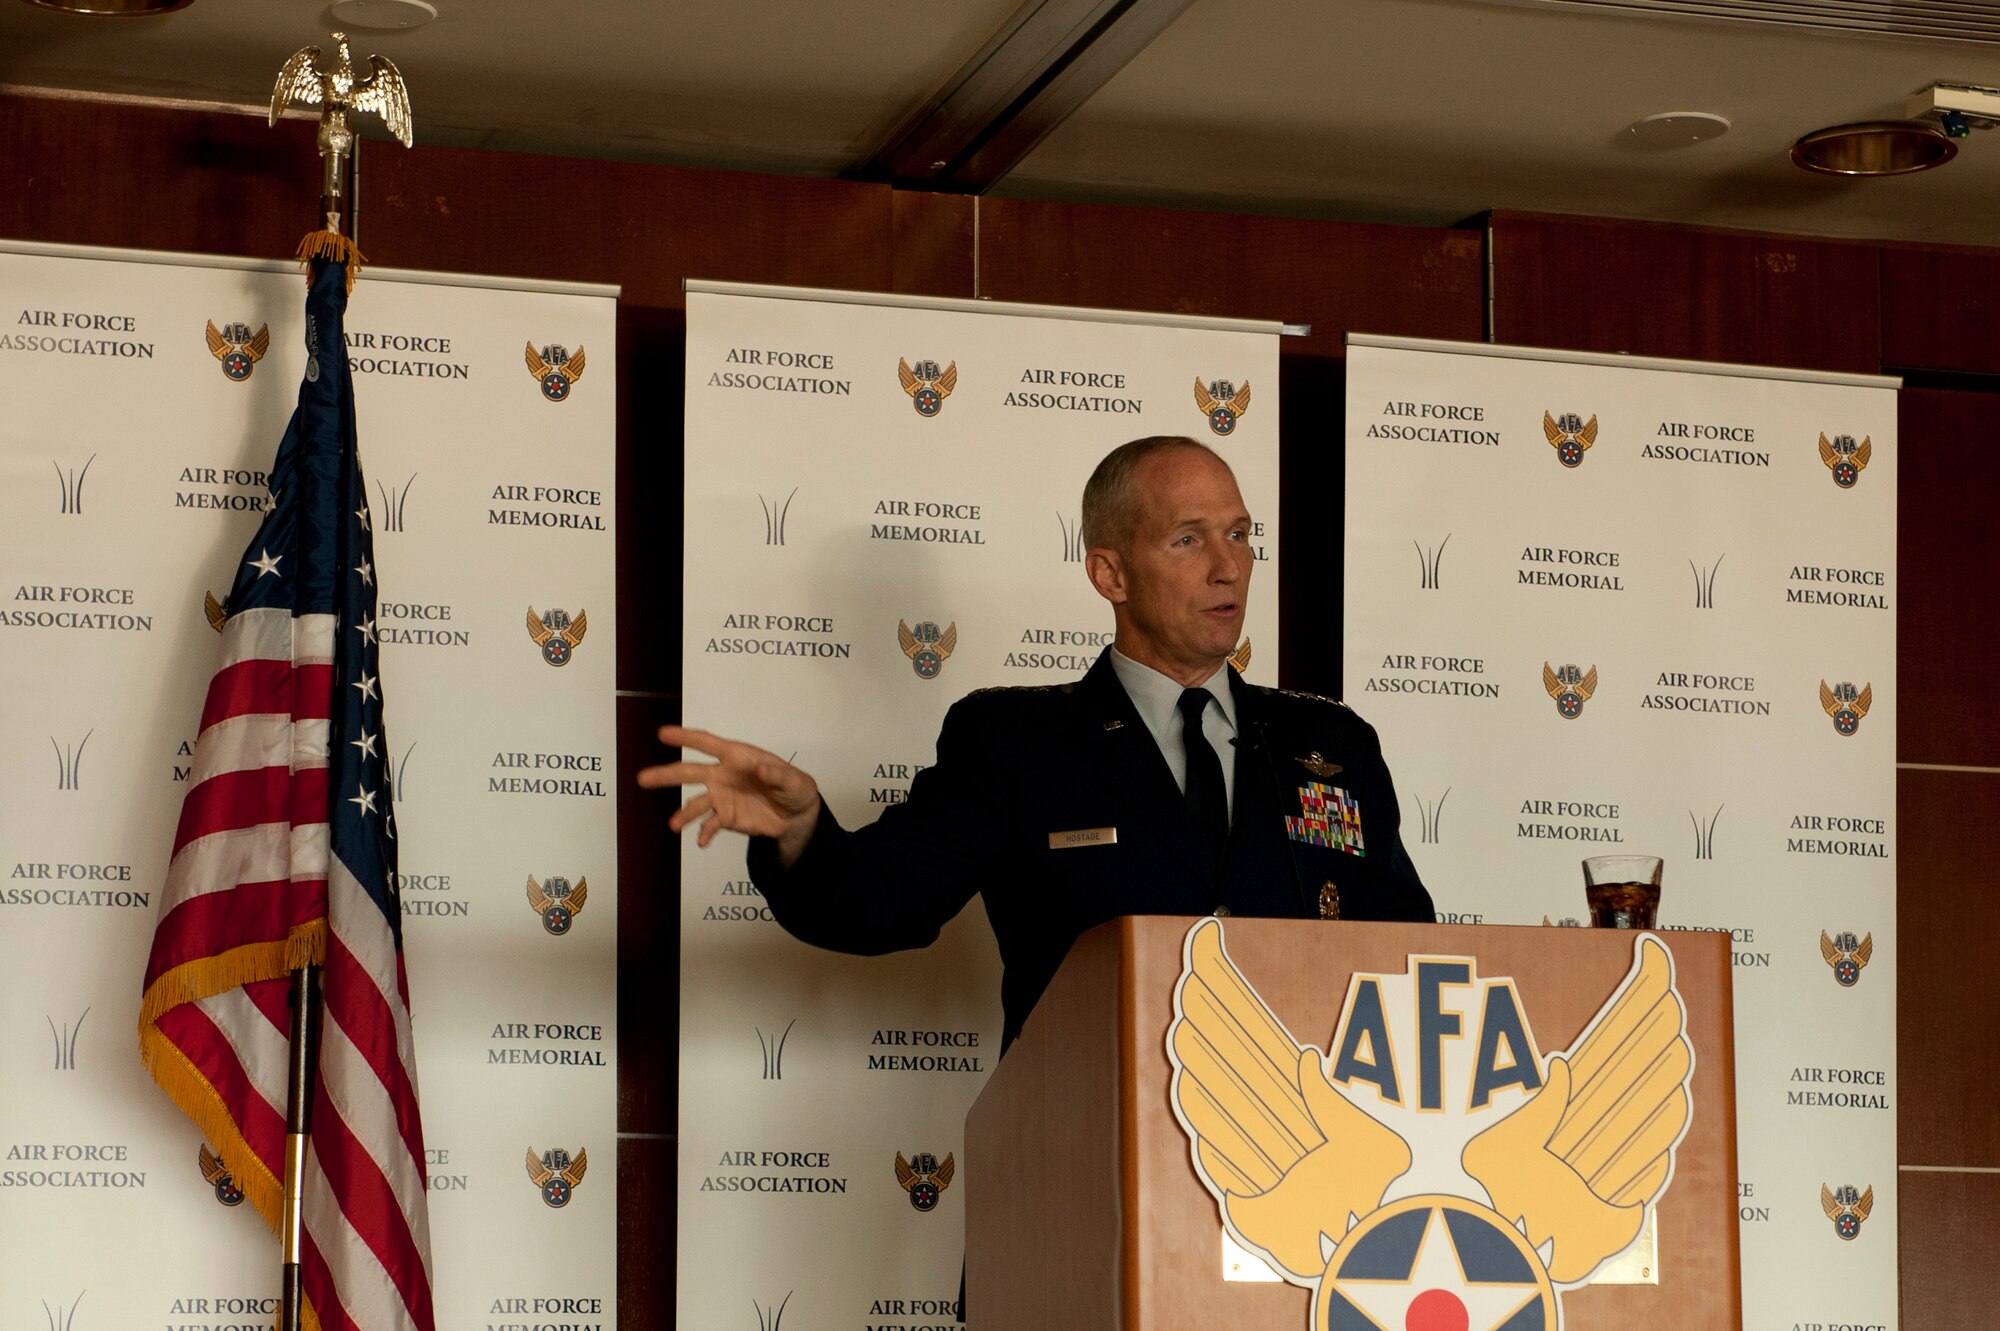 Gen. Mike Hostage speaks to Air Force Association members about maintaining mission readiness despite fiscal challenges, July 29, 2014, in Arlington, Va. The AFA engagement was a part of a breakfast series to allow senior Air Force leaders to speak to the public and media about critical issues affecting the military. Hostage is the commander of Air Combat Command. (U.S. Air Force photo/Staff Sgt. Carlin Leslie)